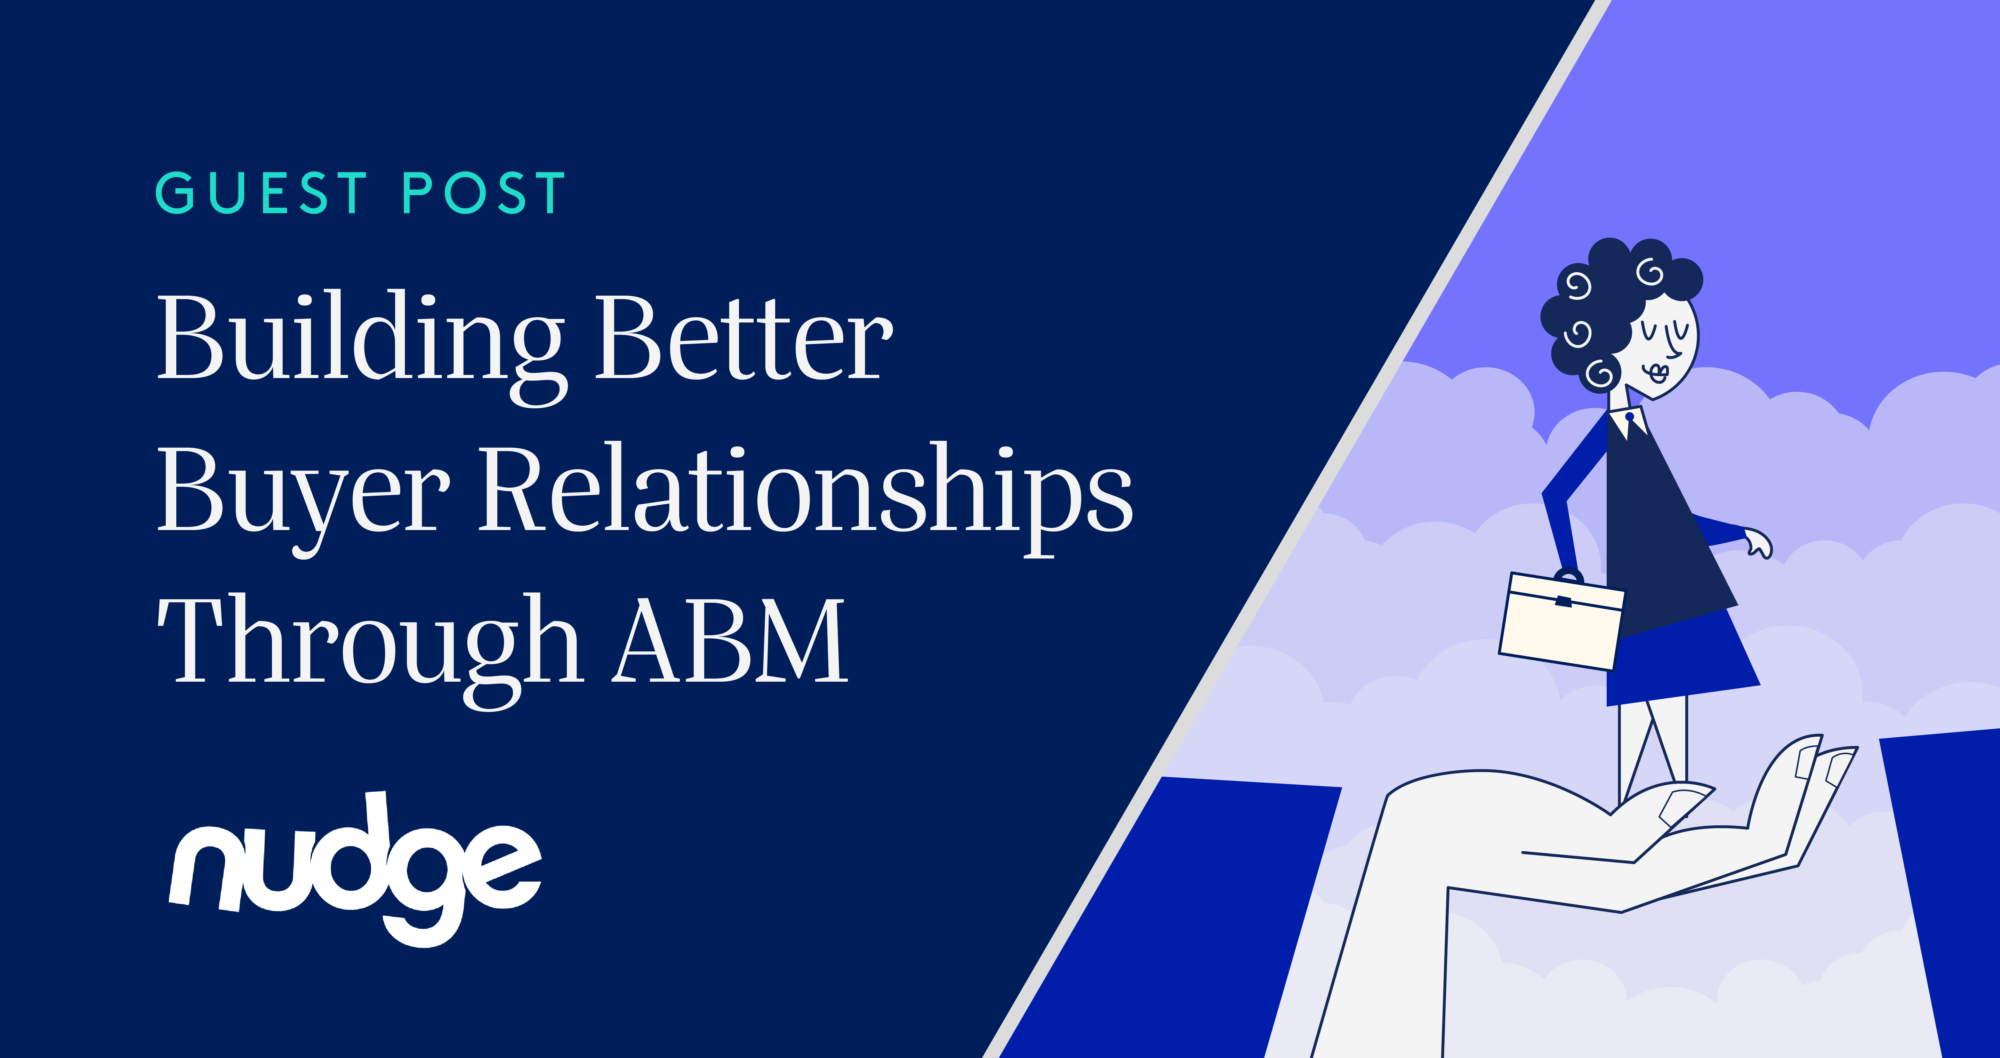 Header Image with a dark blue background with the title of "Guest Post: Building Better Buyer Relationships Through ABM". Cartoon to the right on the title shows a a women with a briefcase crossing a gap with a large hand helping her cross the gap.